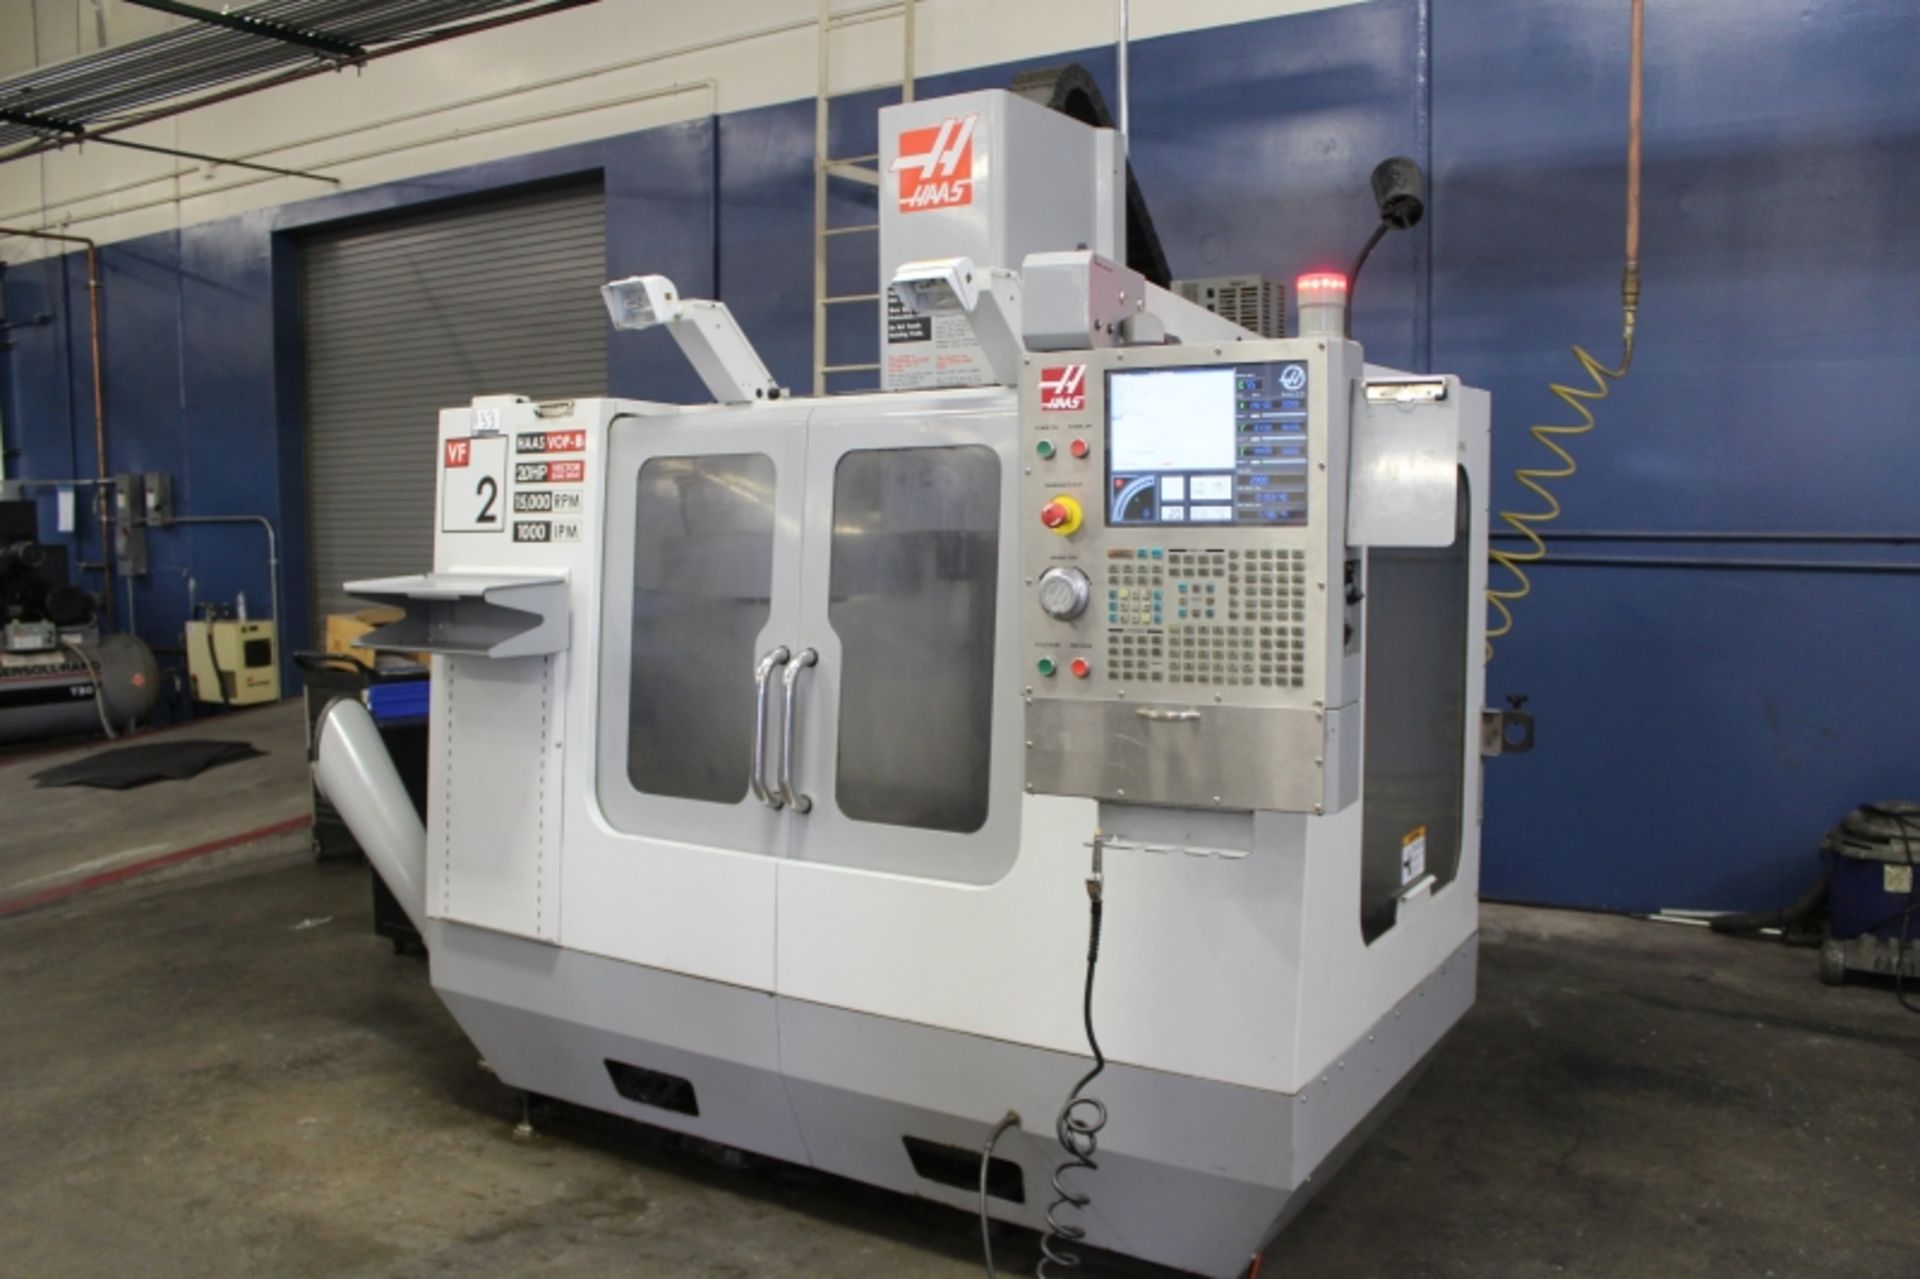 Haas Vf- 2D Vmc S/N 1052988 New 2006 - Image 2 of 8